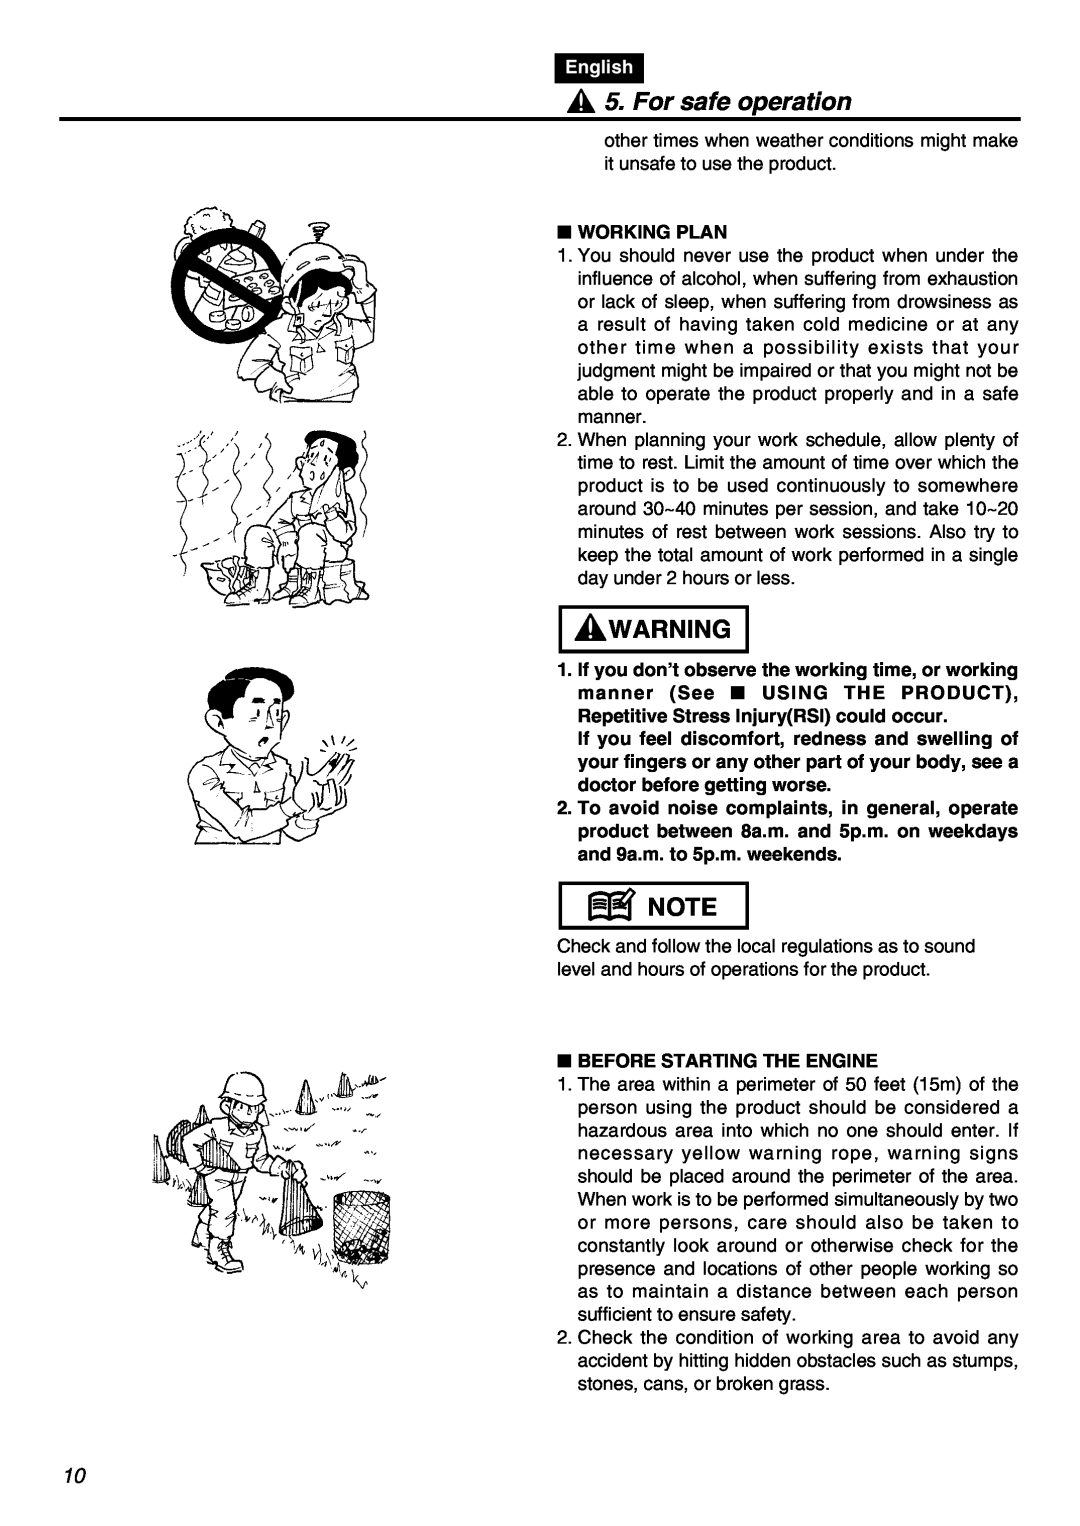 Zenoah HEZ2610F-CA manual For safe operation, English, Working Plan, Repetitive Stress InjuryRSI could occur 